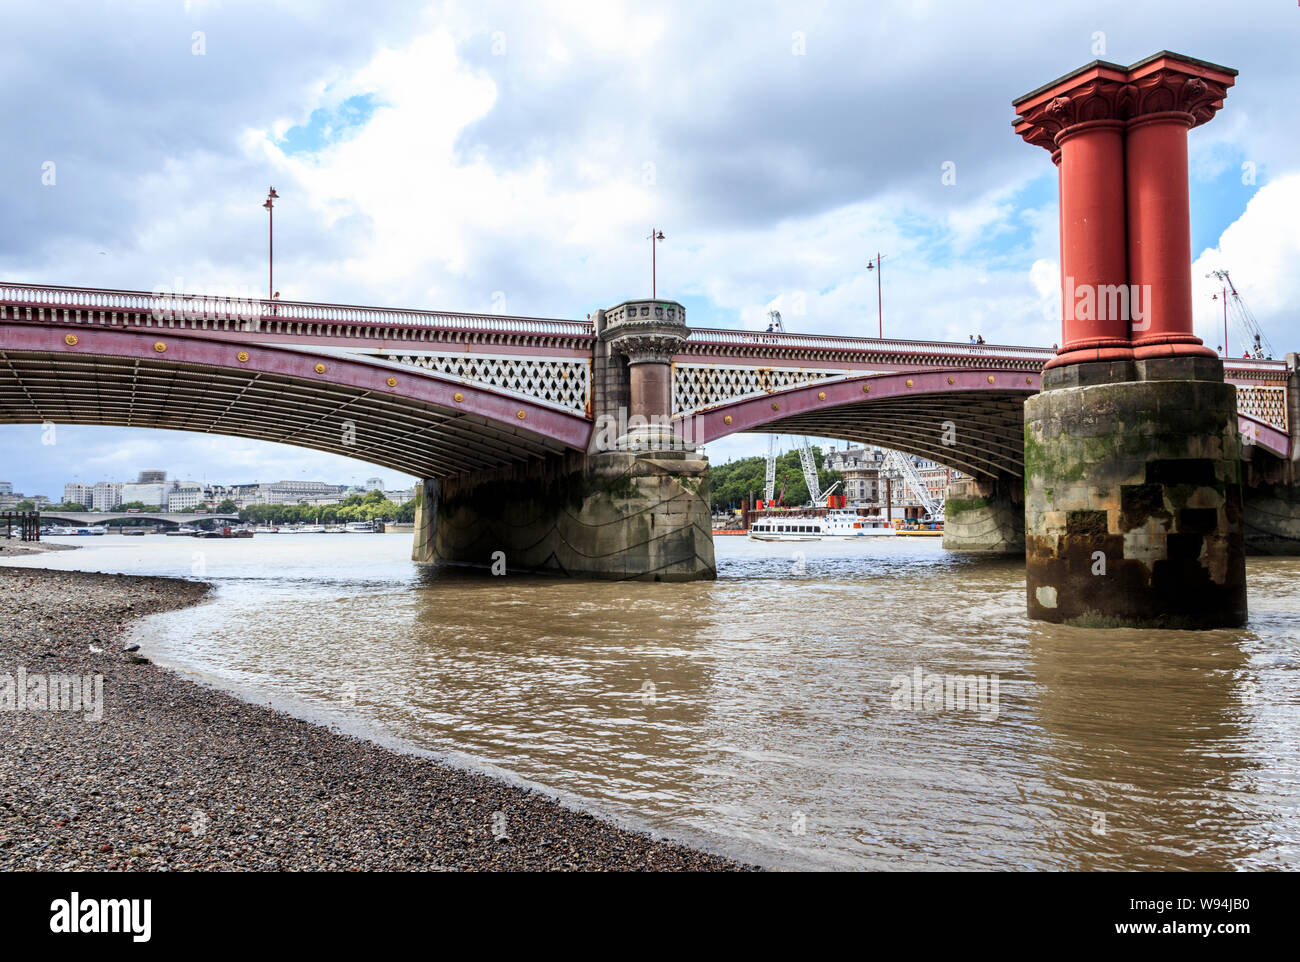 Blackfriars road bridge from the south shore of the River Thames at low tide, pillars of the old bridge on the right, London, UK Stock Photo